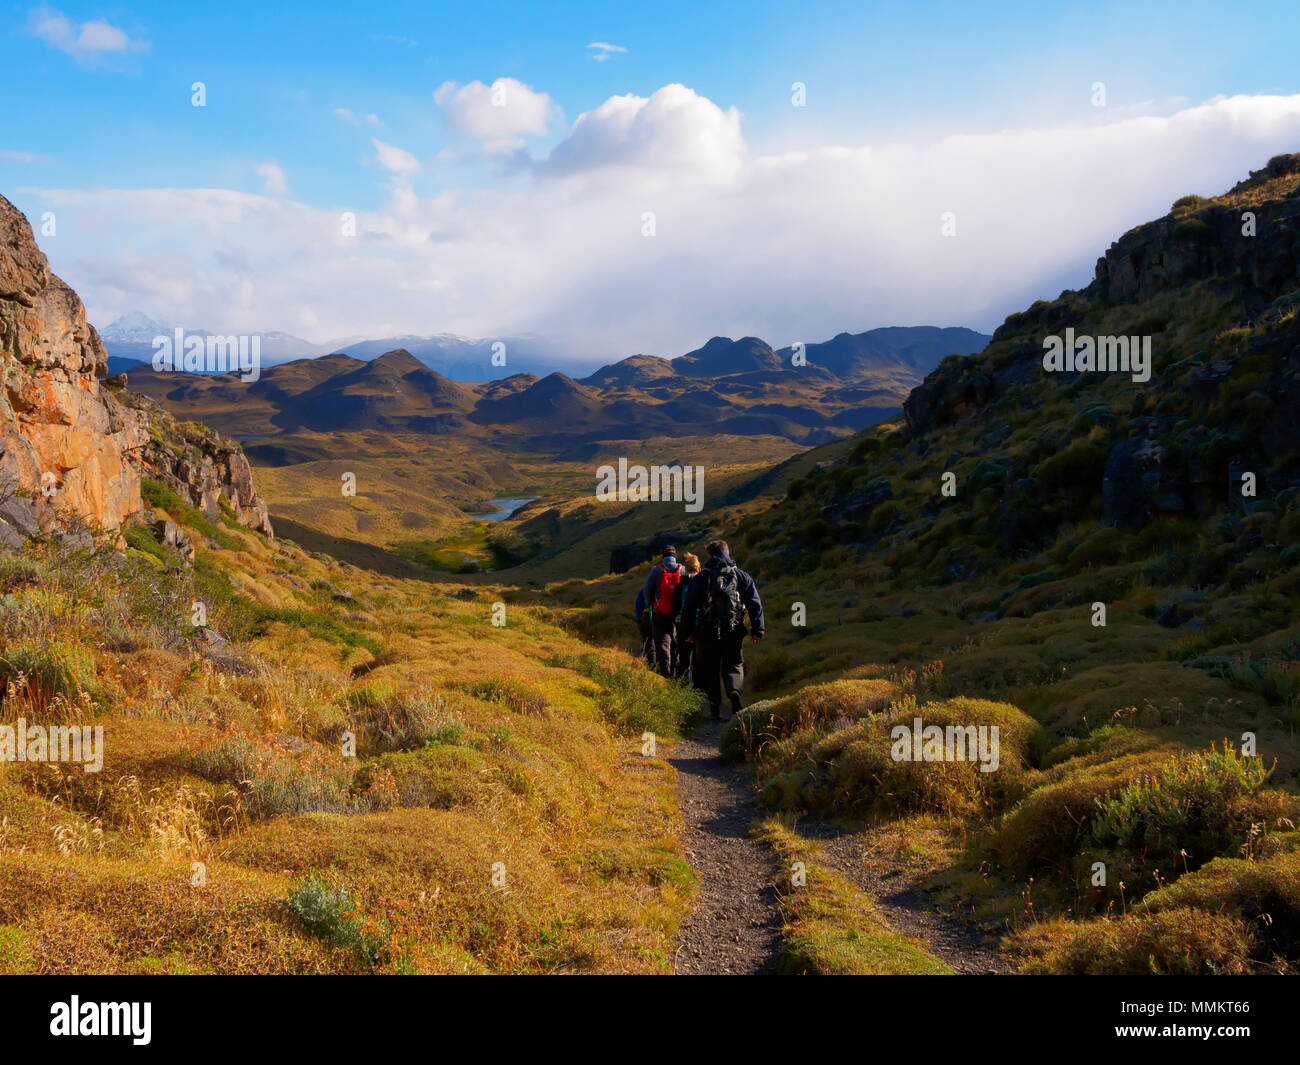 Hiking in Torres del Paine National Park, Patagonia, Chile Stock Photo